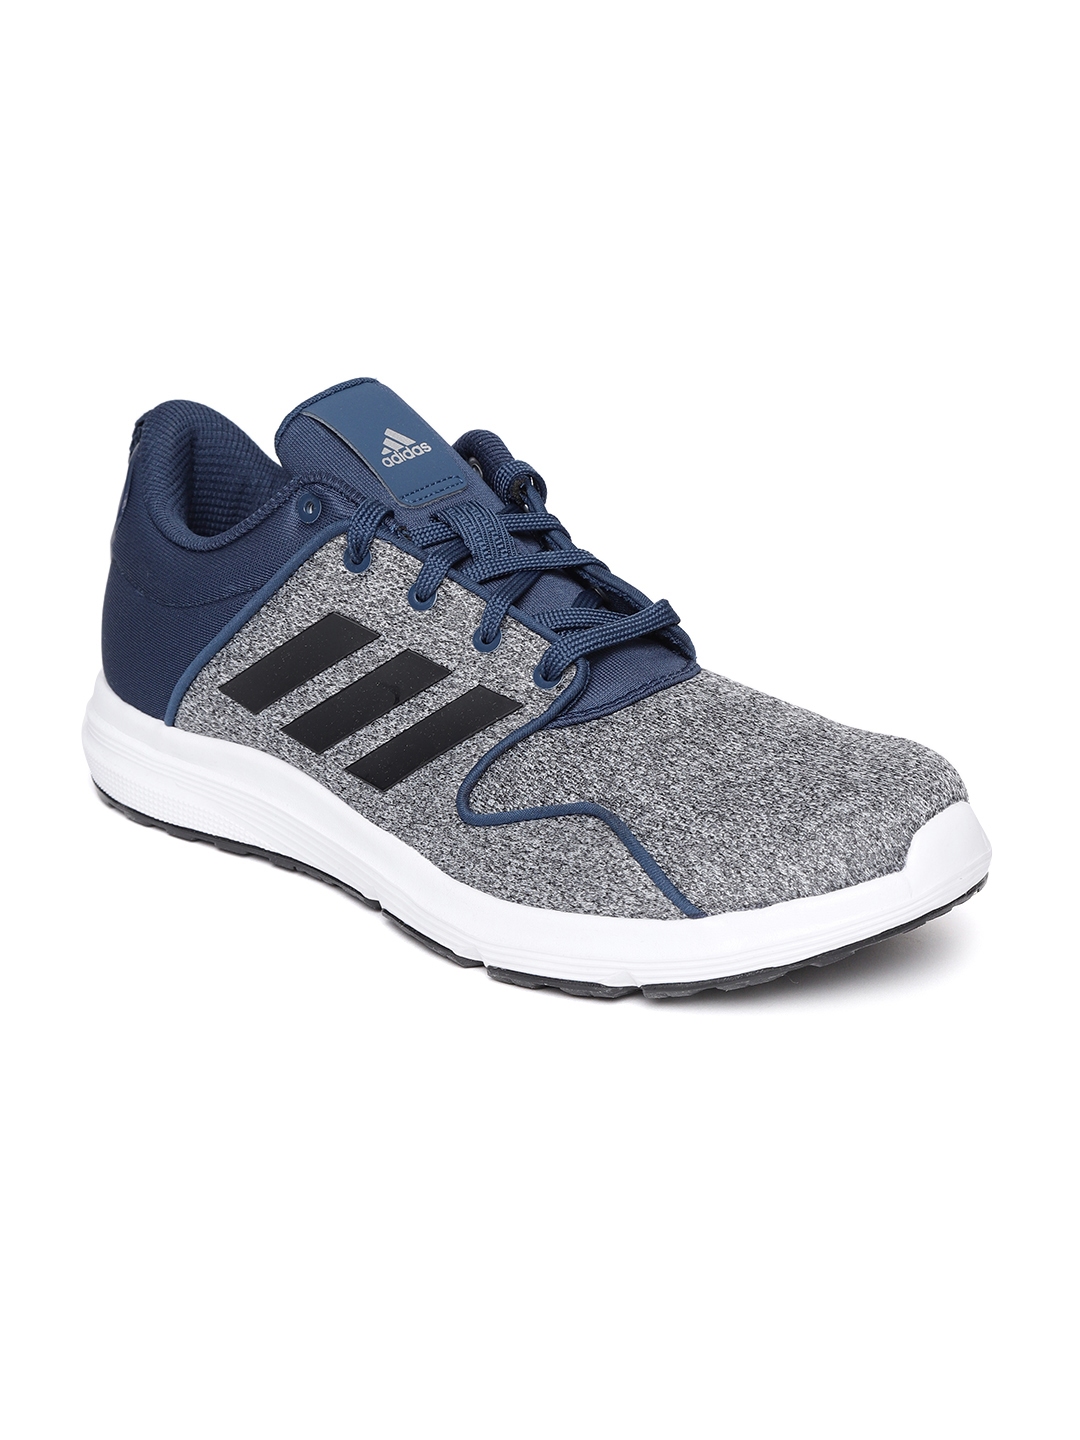 Buy ADIDAS Men Grey & Navy TORIL 1.0 Running Shoes - Sports Shoes for ...